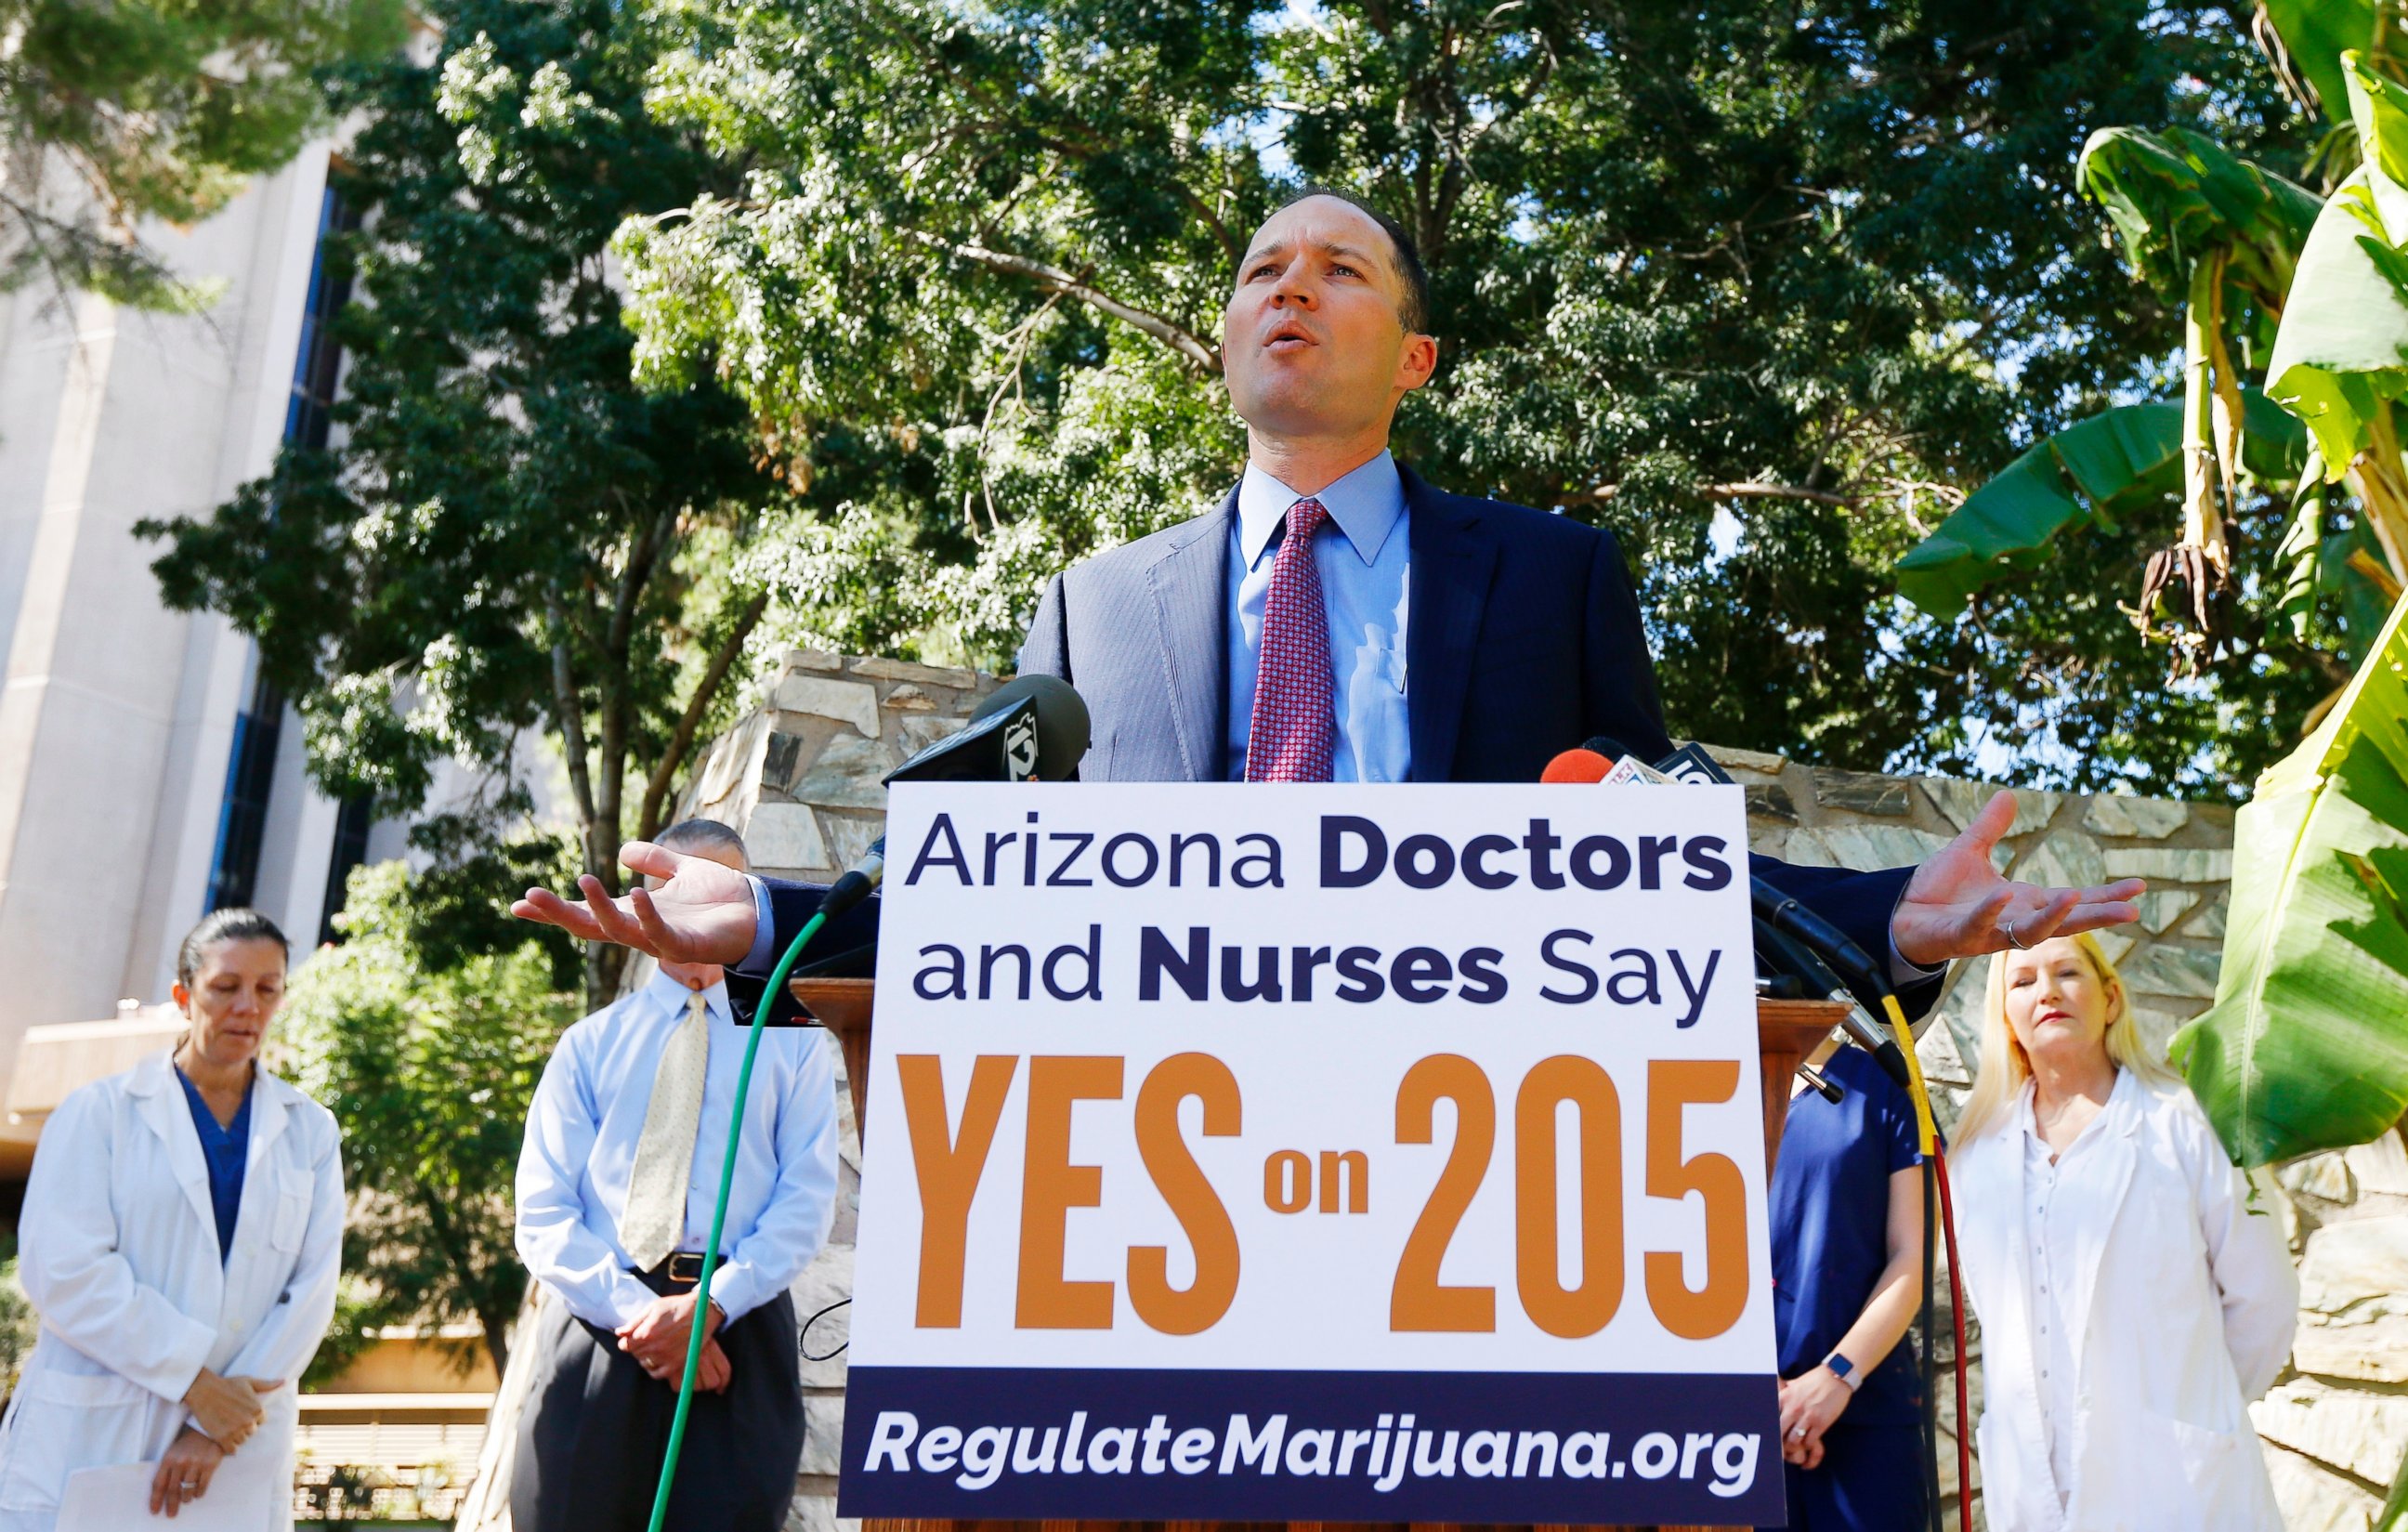 PHOTO: Doctors and nurses in Phoenix, Arizona at an event in front of the state capitol for Prop 205, the legalization of recreational marijuana, Oct. 26, 2016.